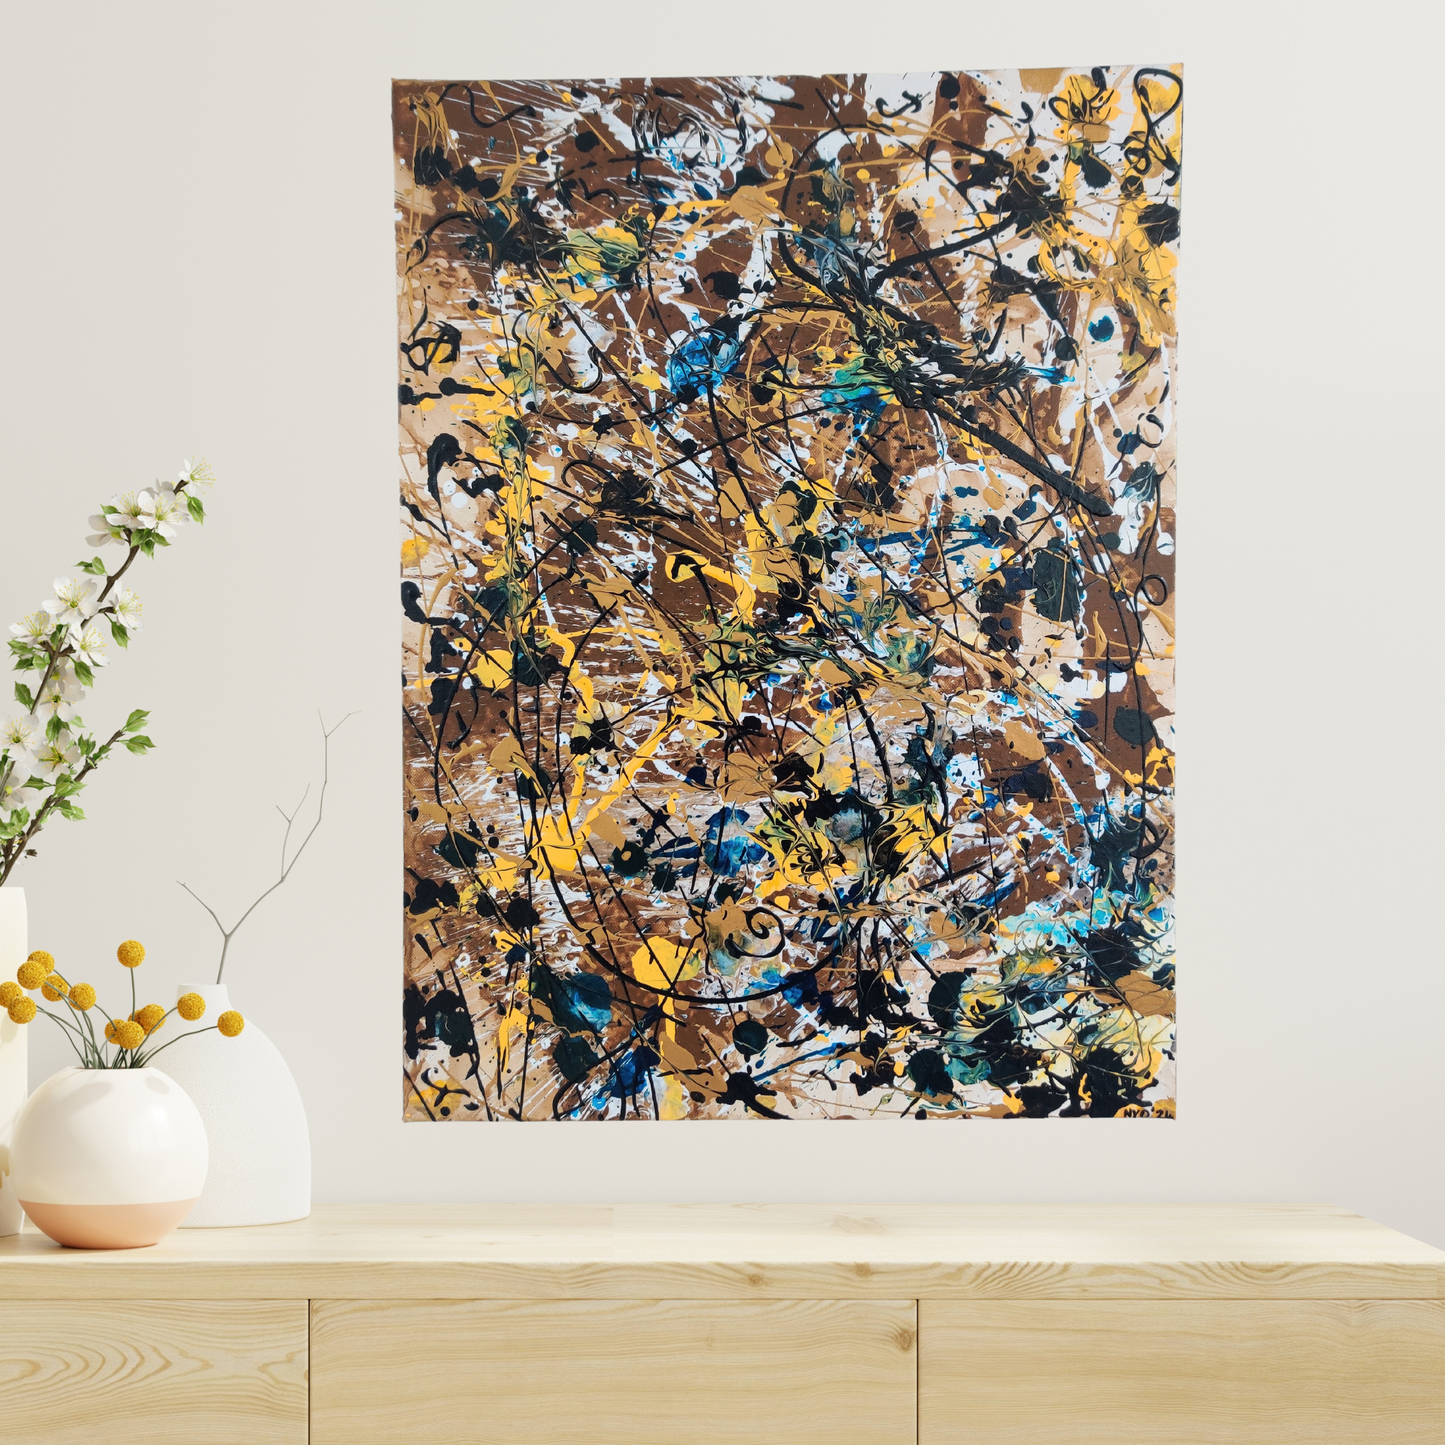 Buzzing Harmony Abstract Style Acrylic Painting on Canvas